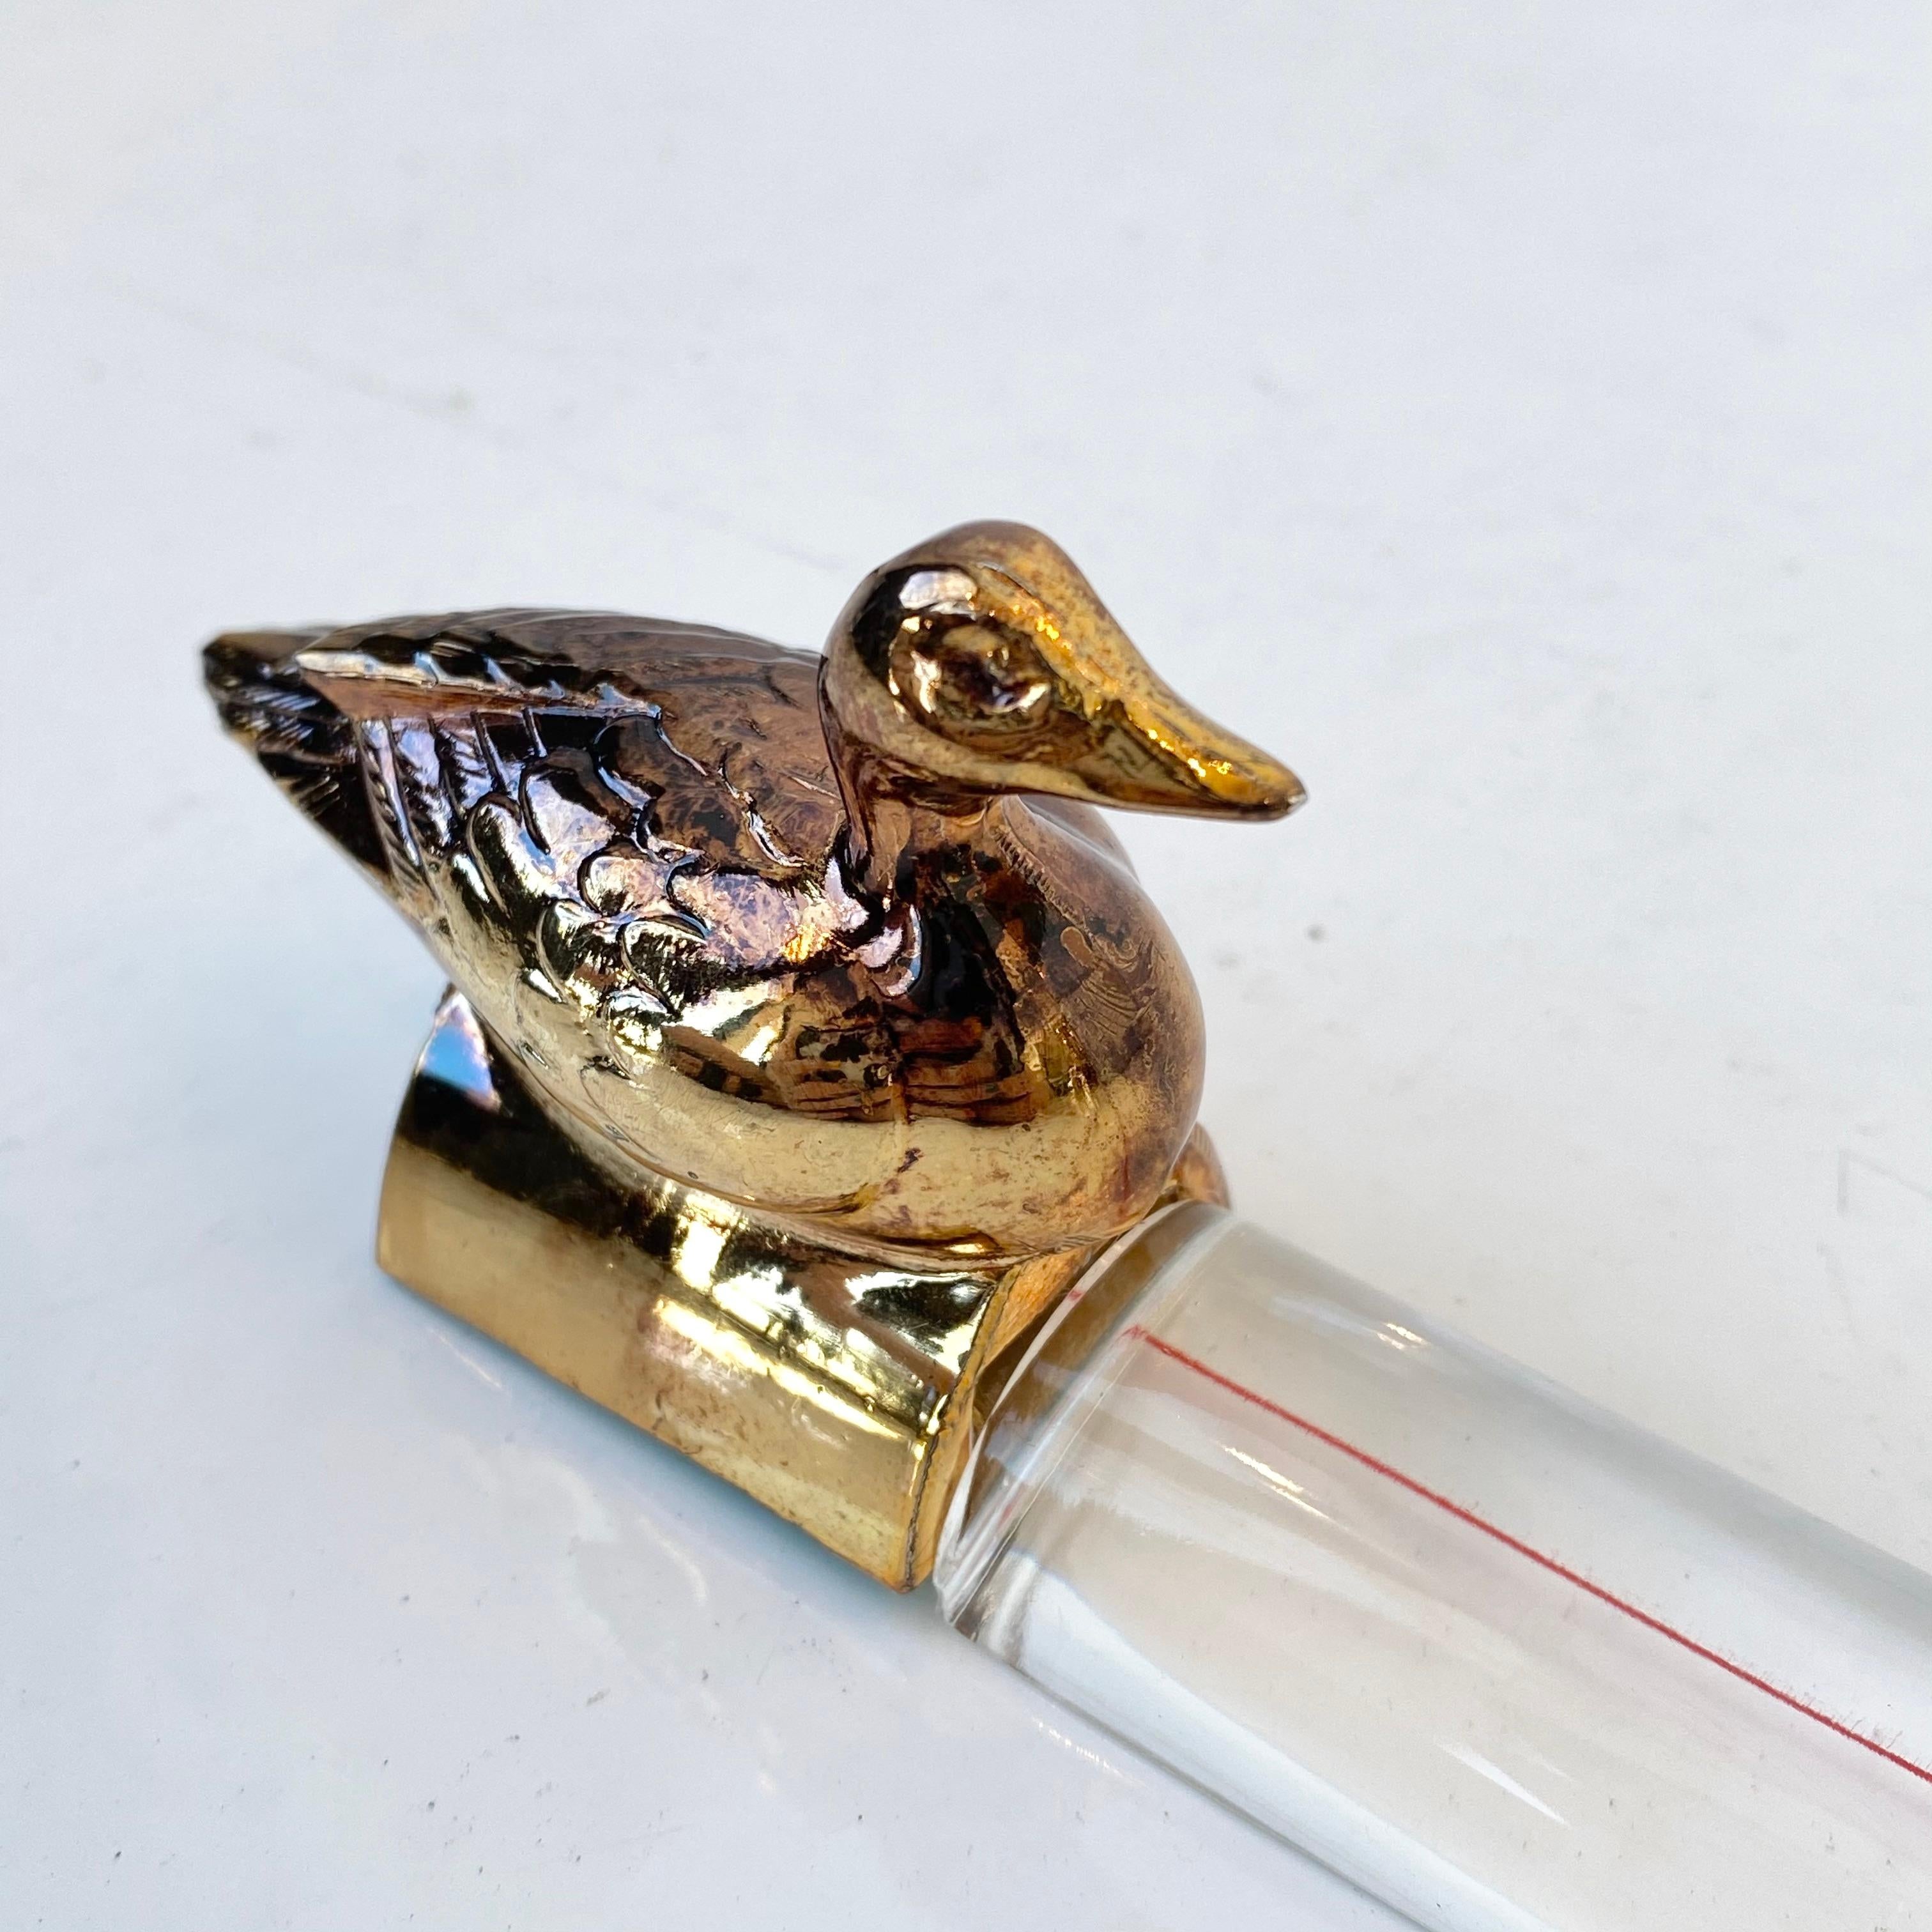 Cool vintage desk loupe with brass colored duck. Working magnifying glass and paperweight. Made of metal and glass. Label on bottom reads 